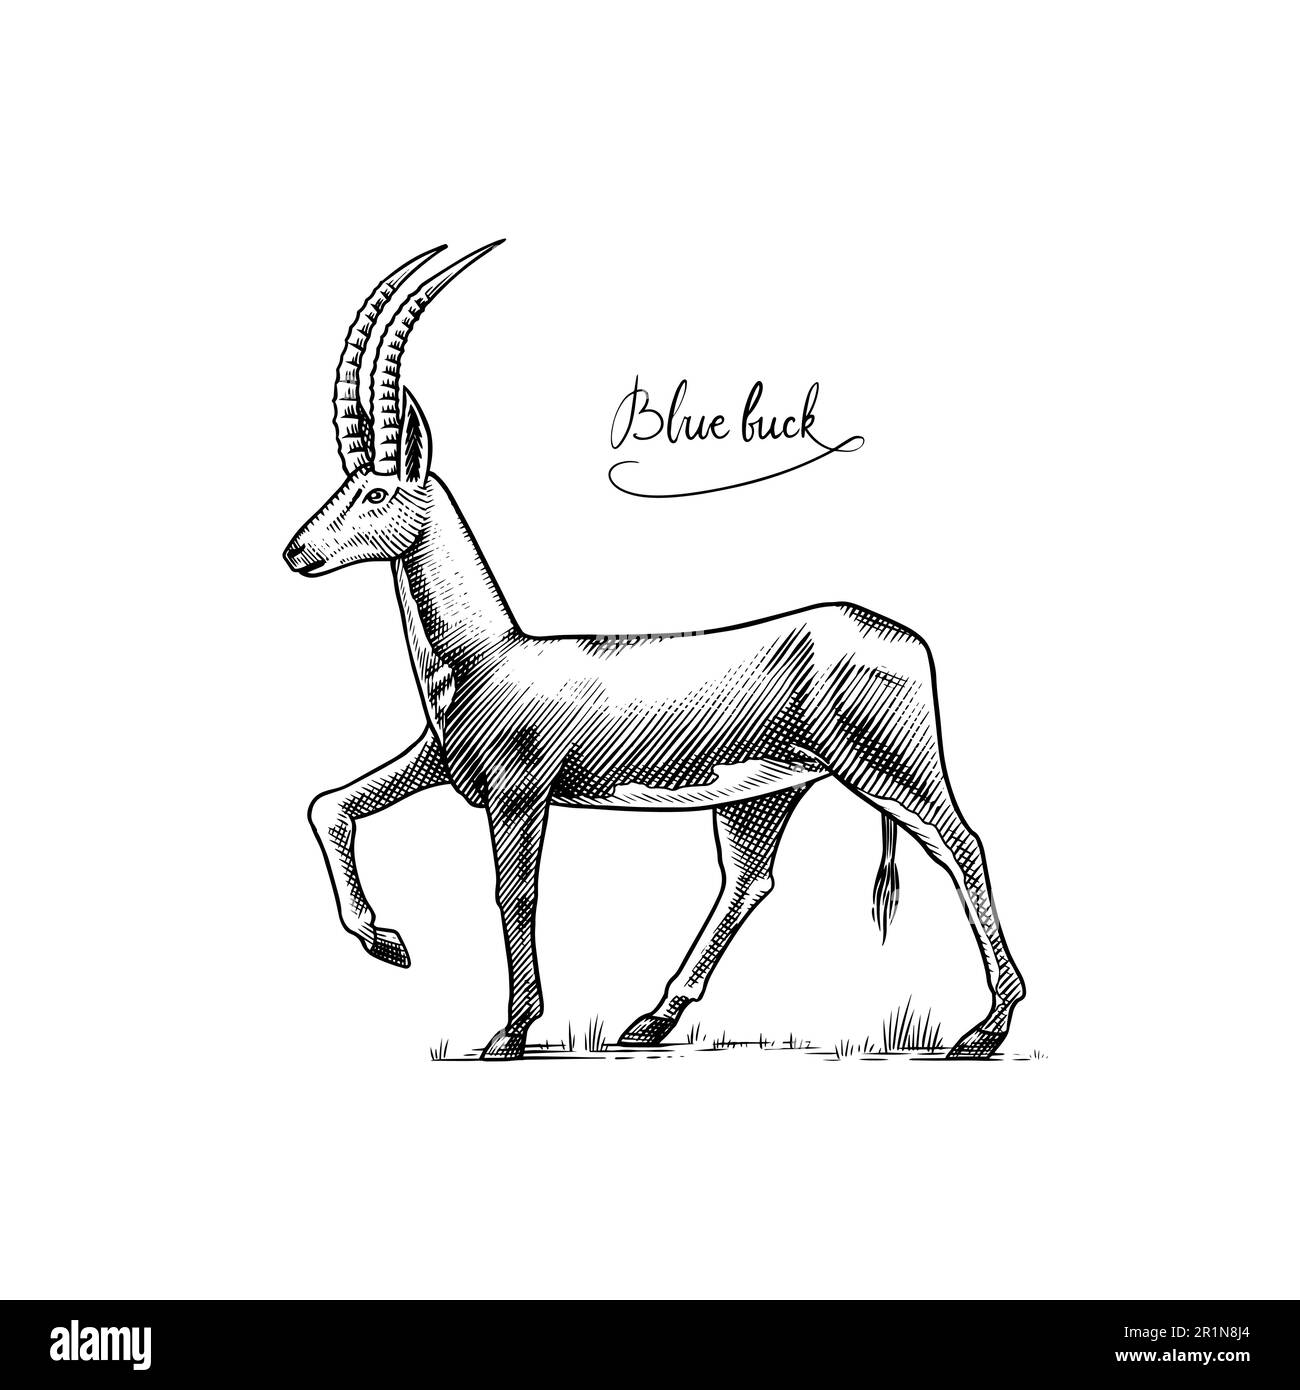 Bluebuck or blue or roan antelope. Extinct mammal animal. Engraved Hand drawn vector illustration in woodcut Graphic vintage style. Stock Vector